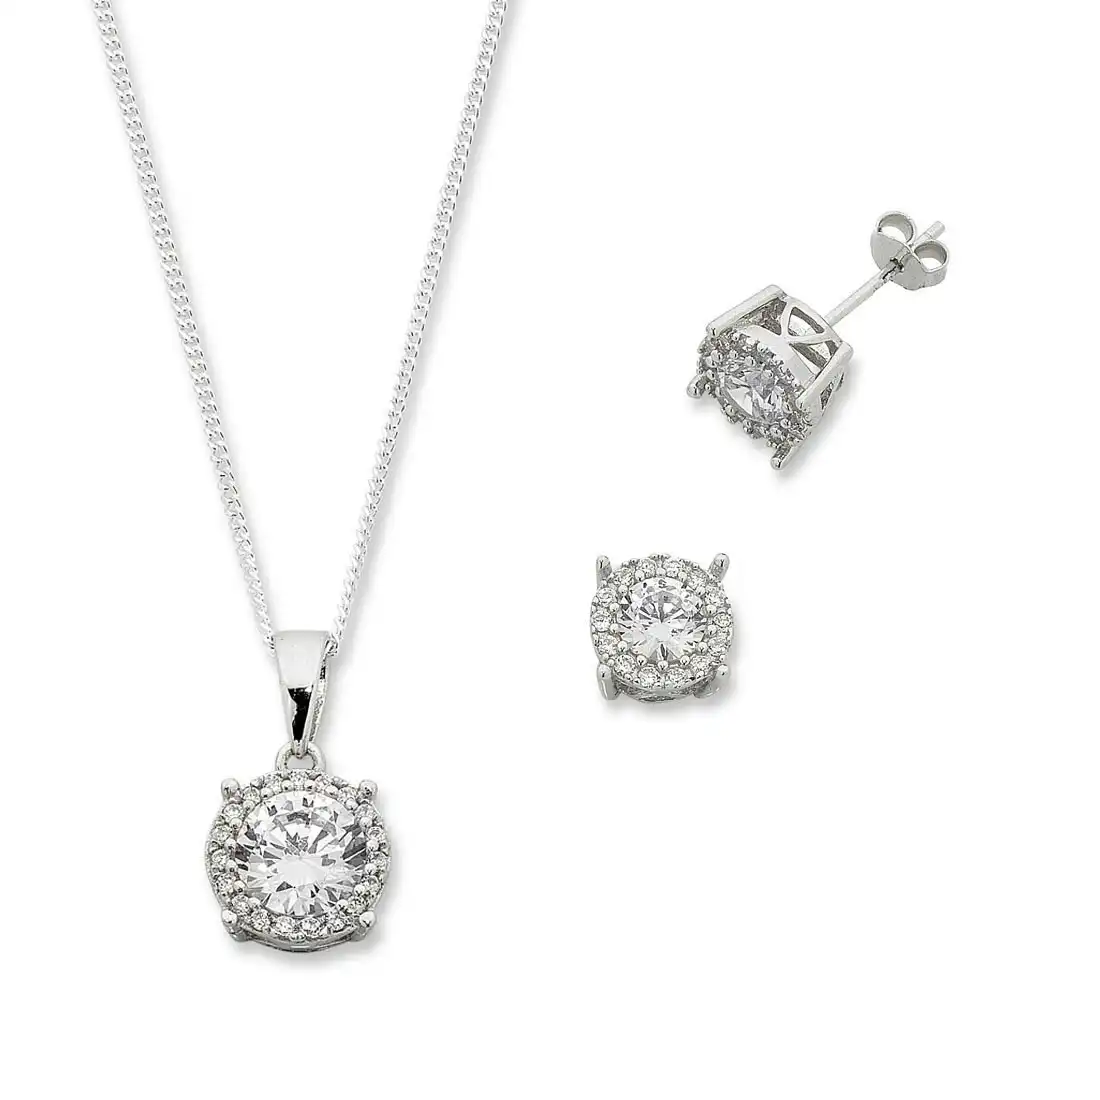 Sterling Silver Cubic Zirconia Necklace & Earring Set